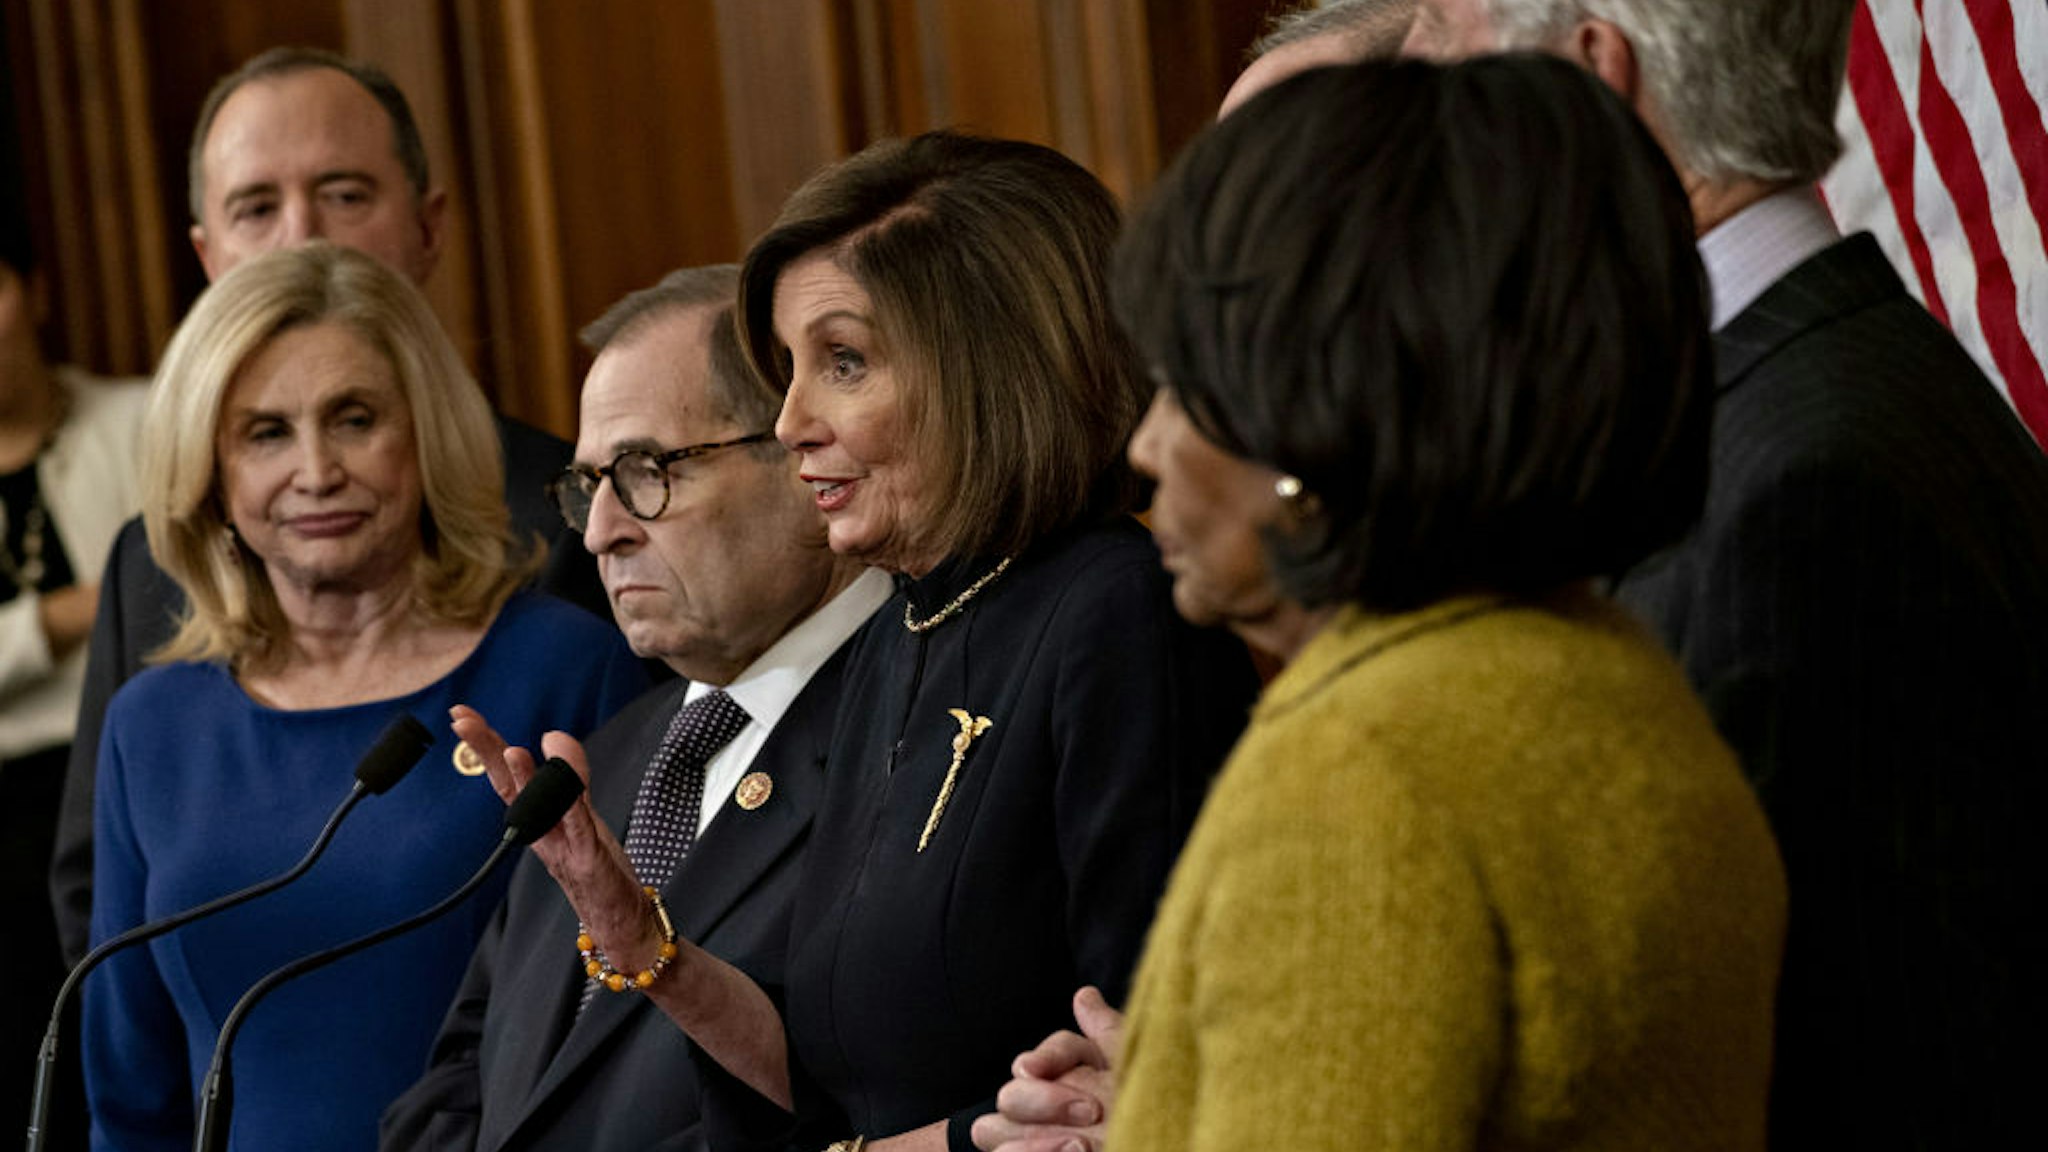 U.S. House Speaker Nancy Pelosi, a Democrat from California, center, speaks during a news conference after the House voted on articles of impeachment against President Donald Trump at the U.S. Capitol in Washington, D.C., U.S., on Wednesday, Dec. 18, 2019.